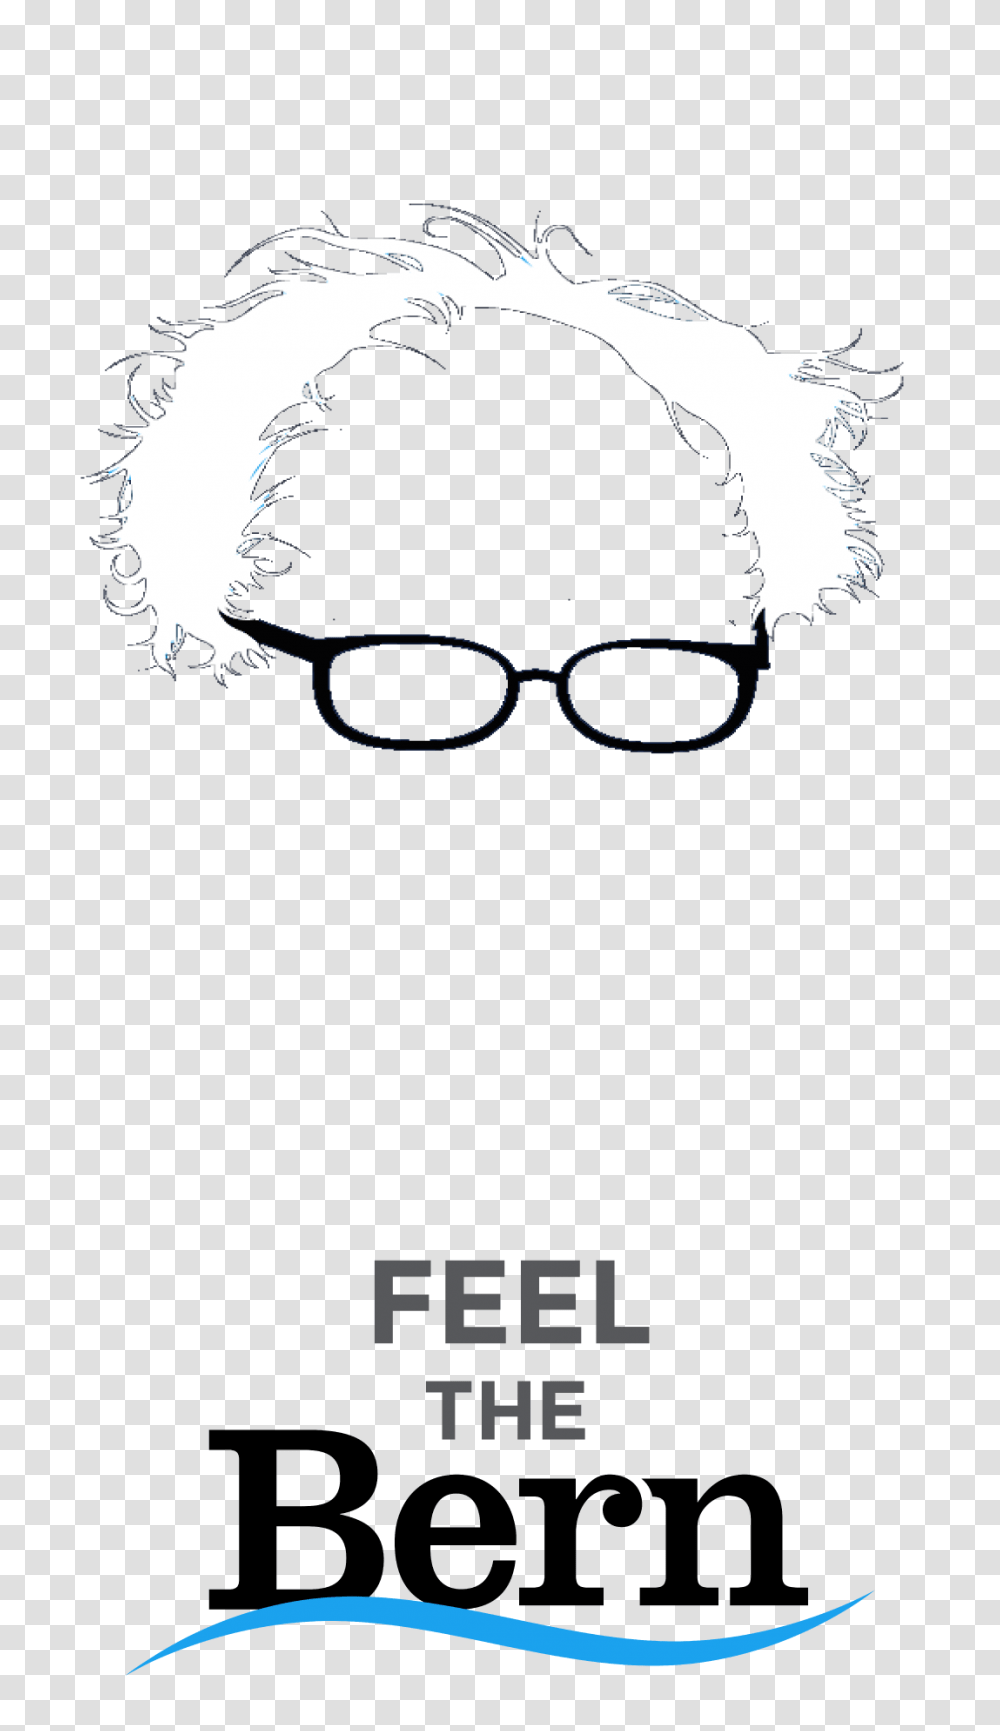 Feel The Bern Snapchat Filters Sandersforpresident, Goggles, Accessories, Accessory, Silhouette Transparent Png